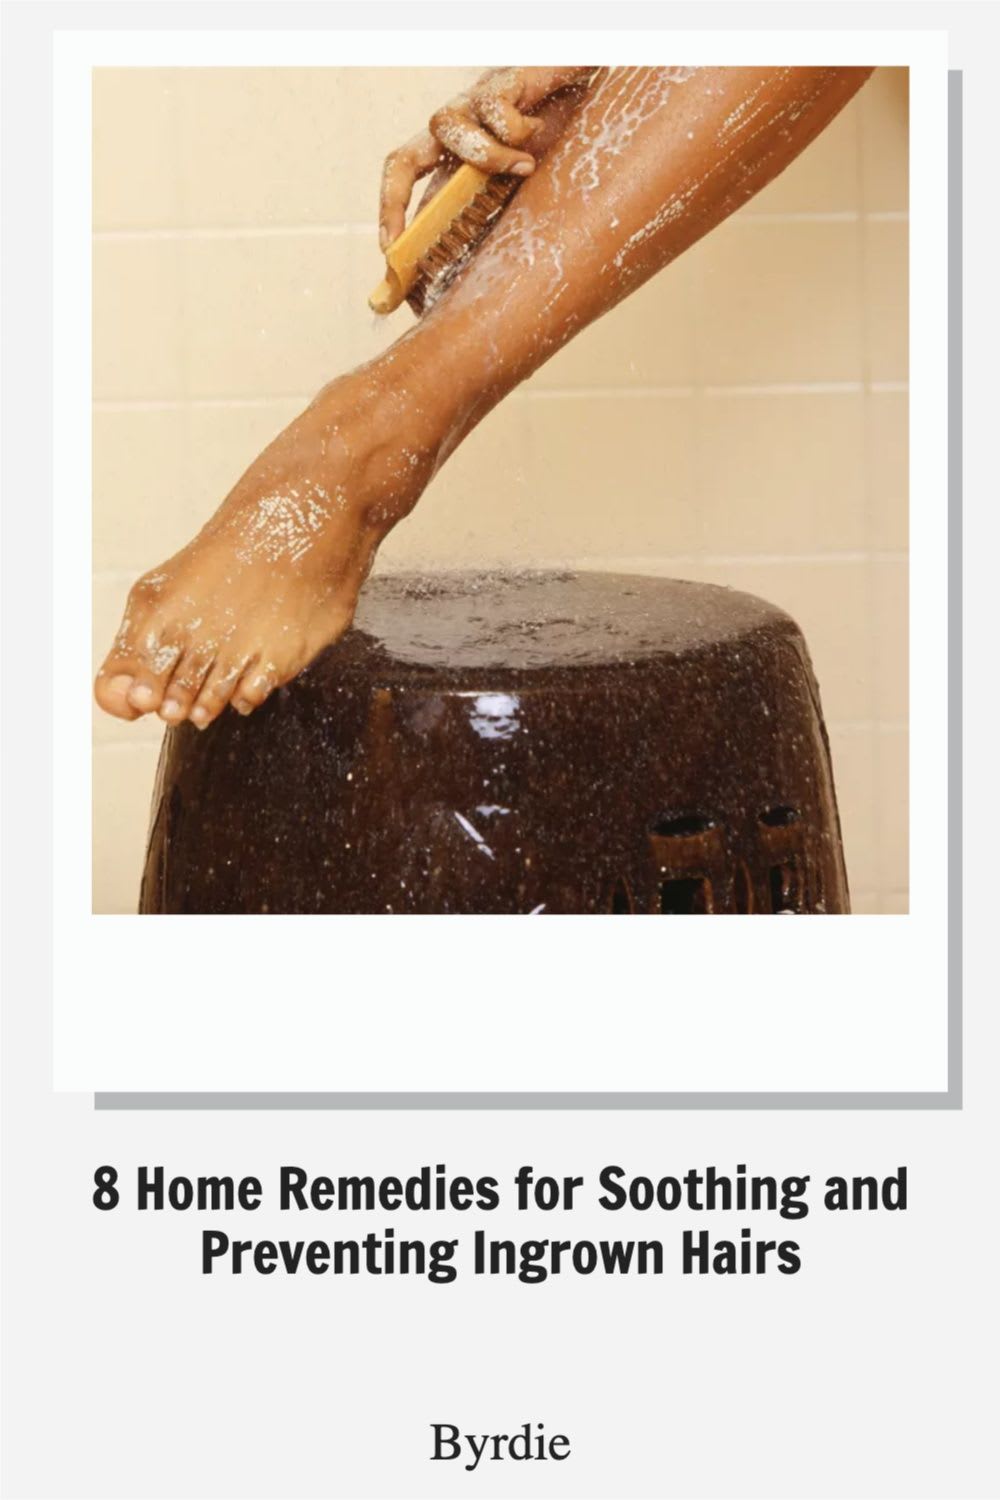 8 Home Remedies for Soothing and Preventing Ingrown Hairs